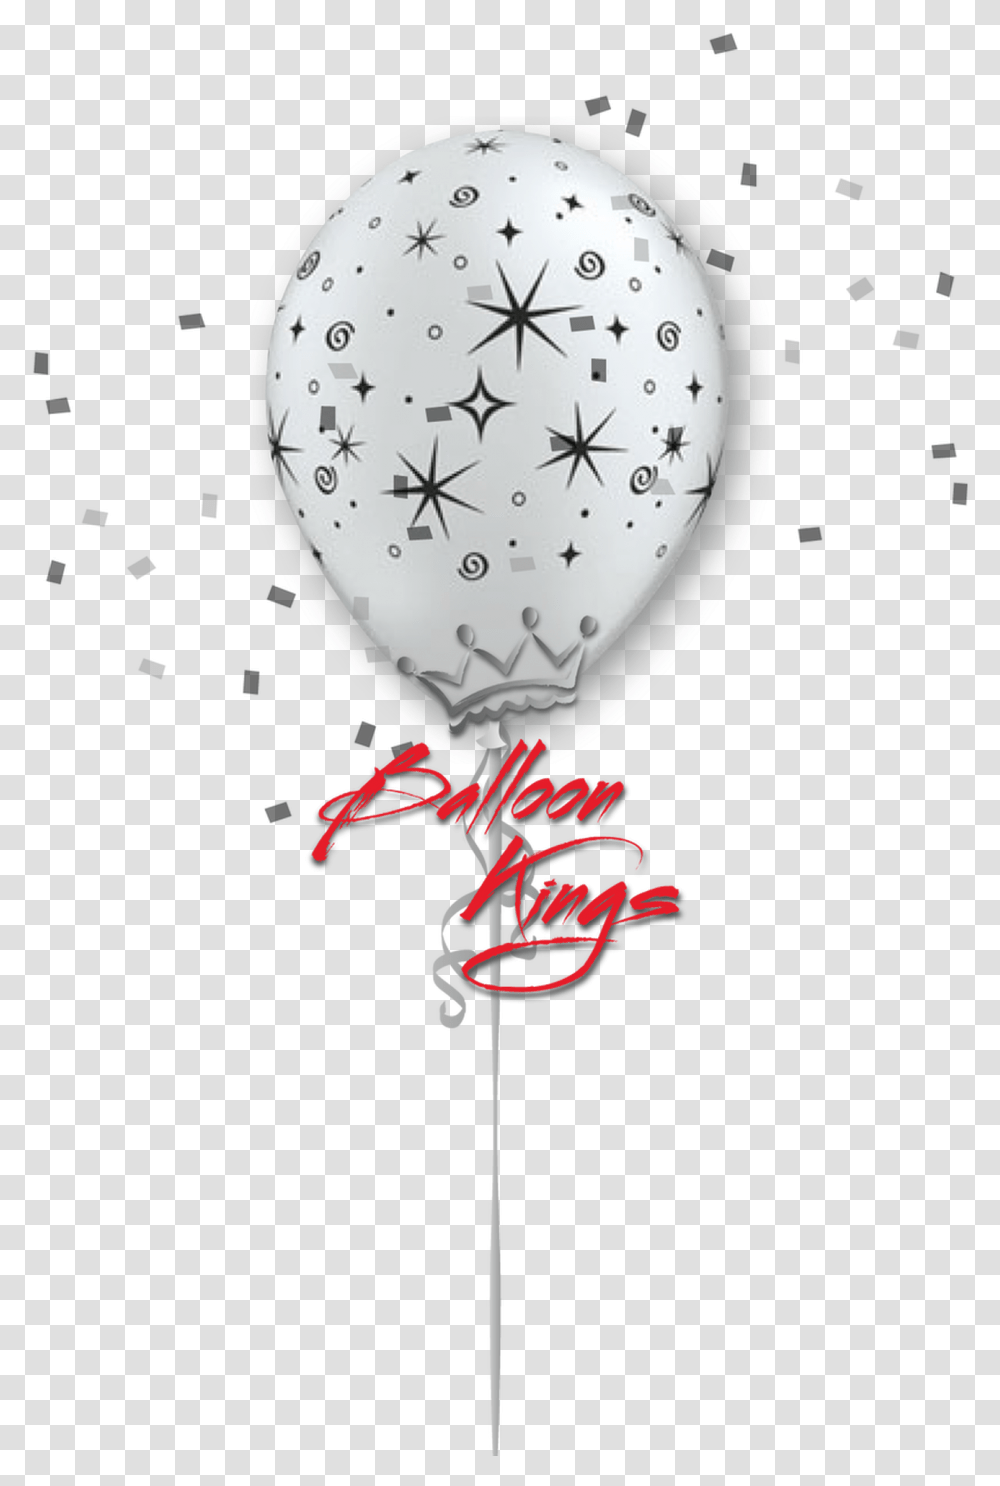 Sparkles Silver Picsart Editing Background, Balloon, Clock Tower, Architecture, Building Transparent Png